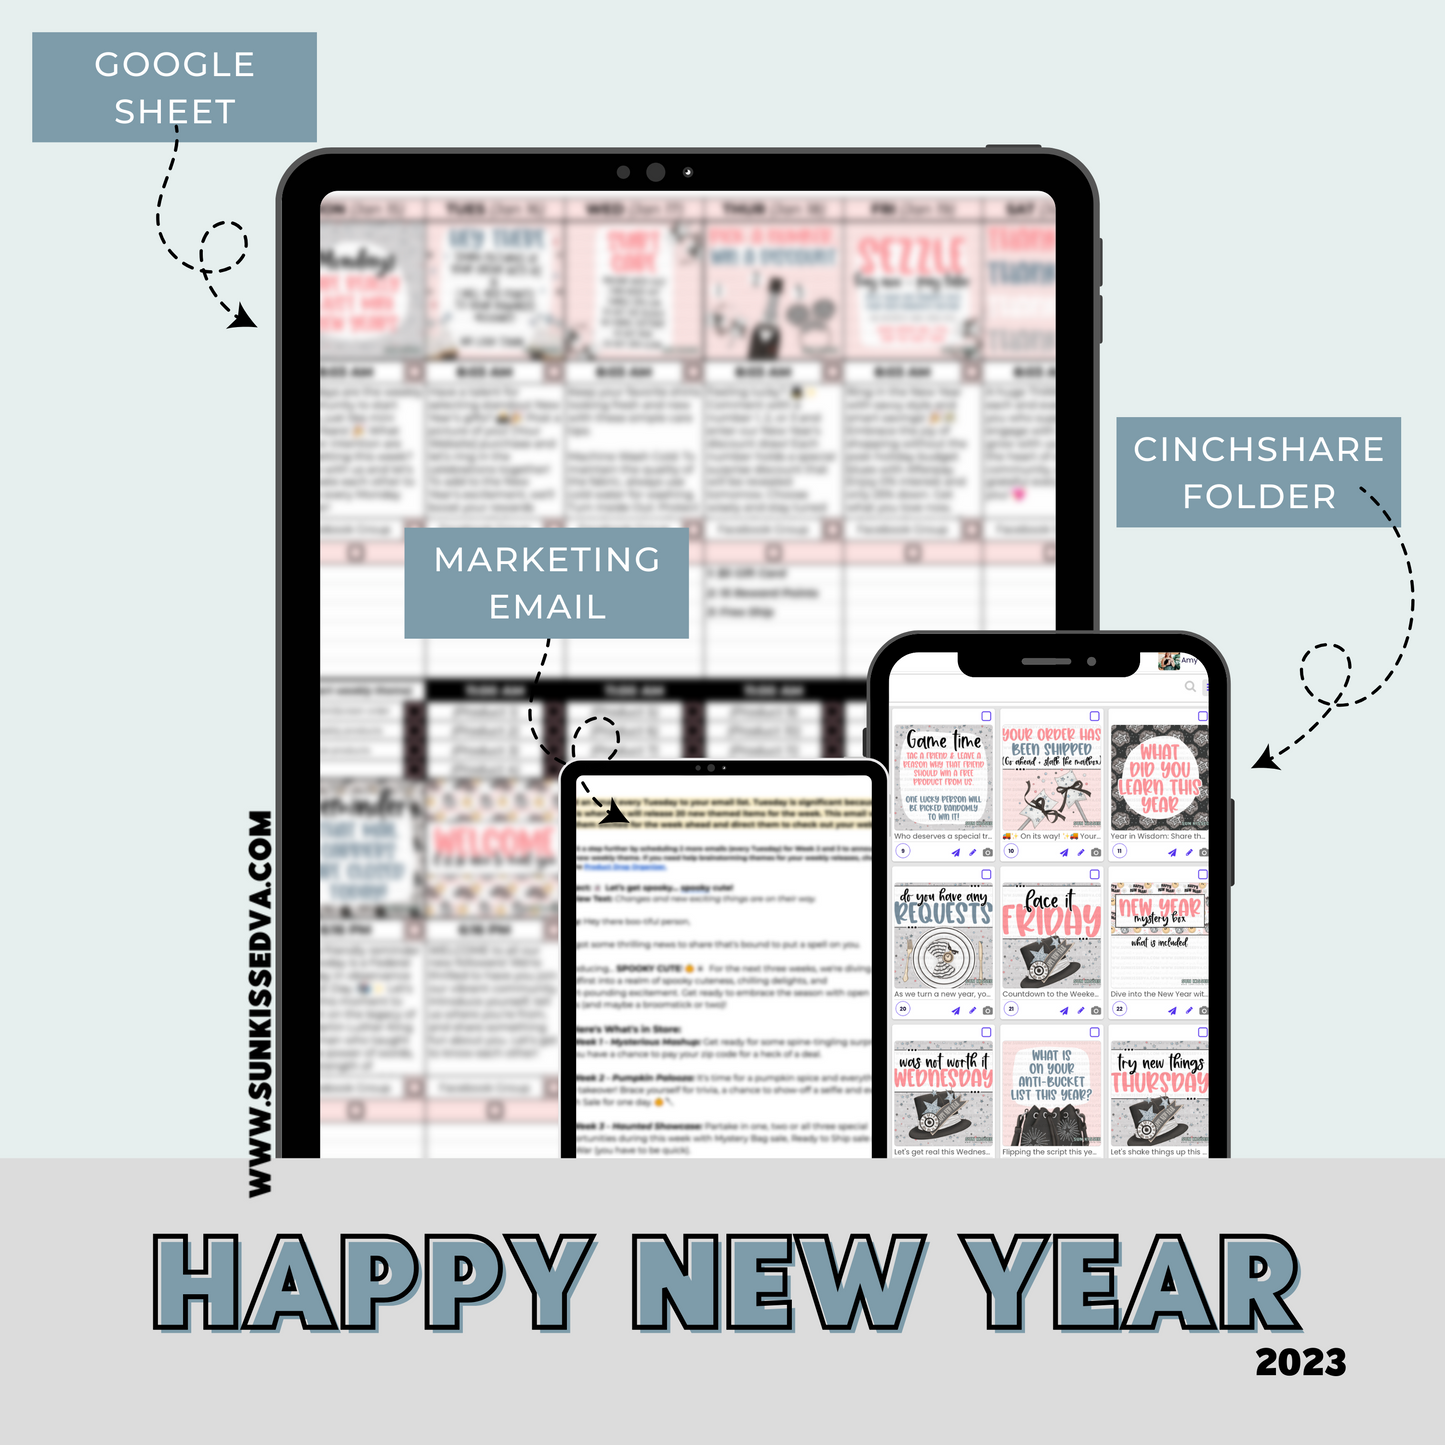 Happy New Year Content Calendar themed social media plan | Sun Kissed Virtual Assistant